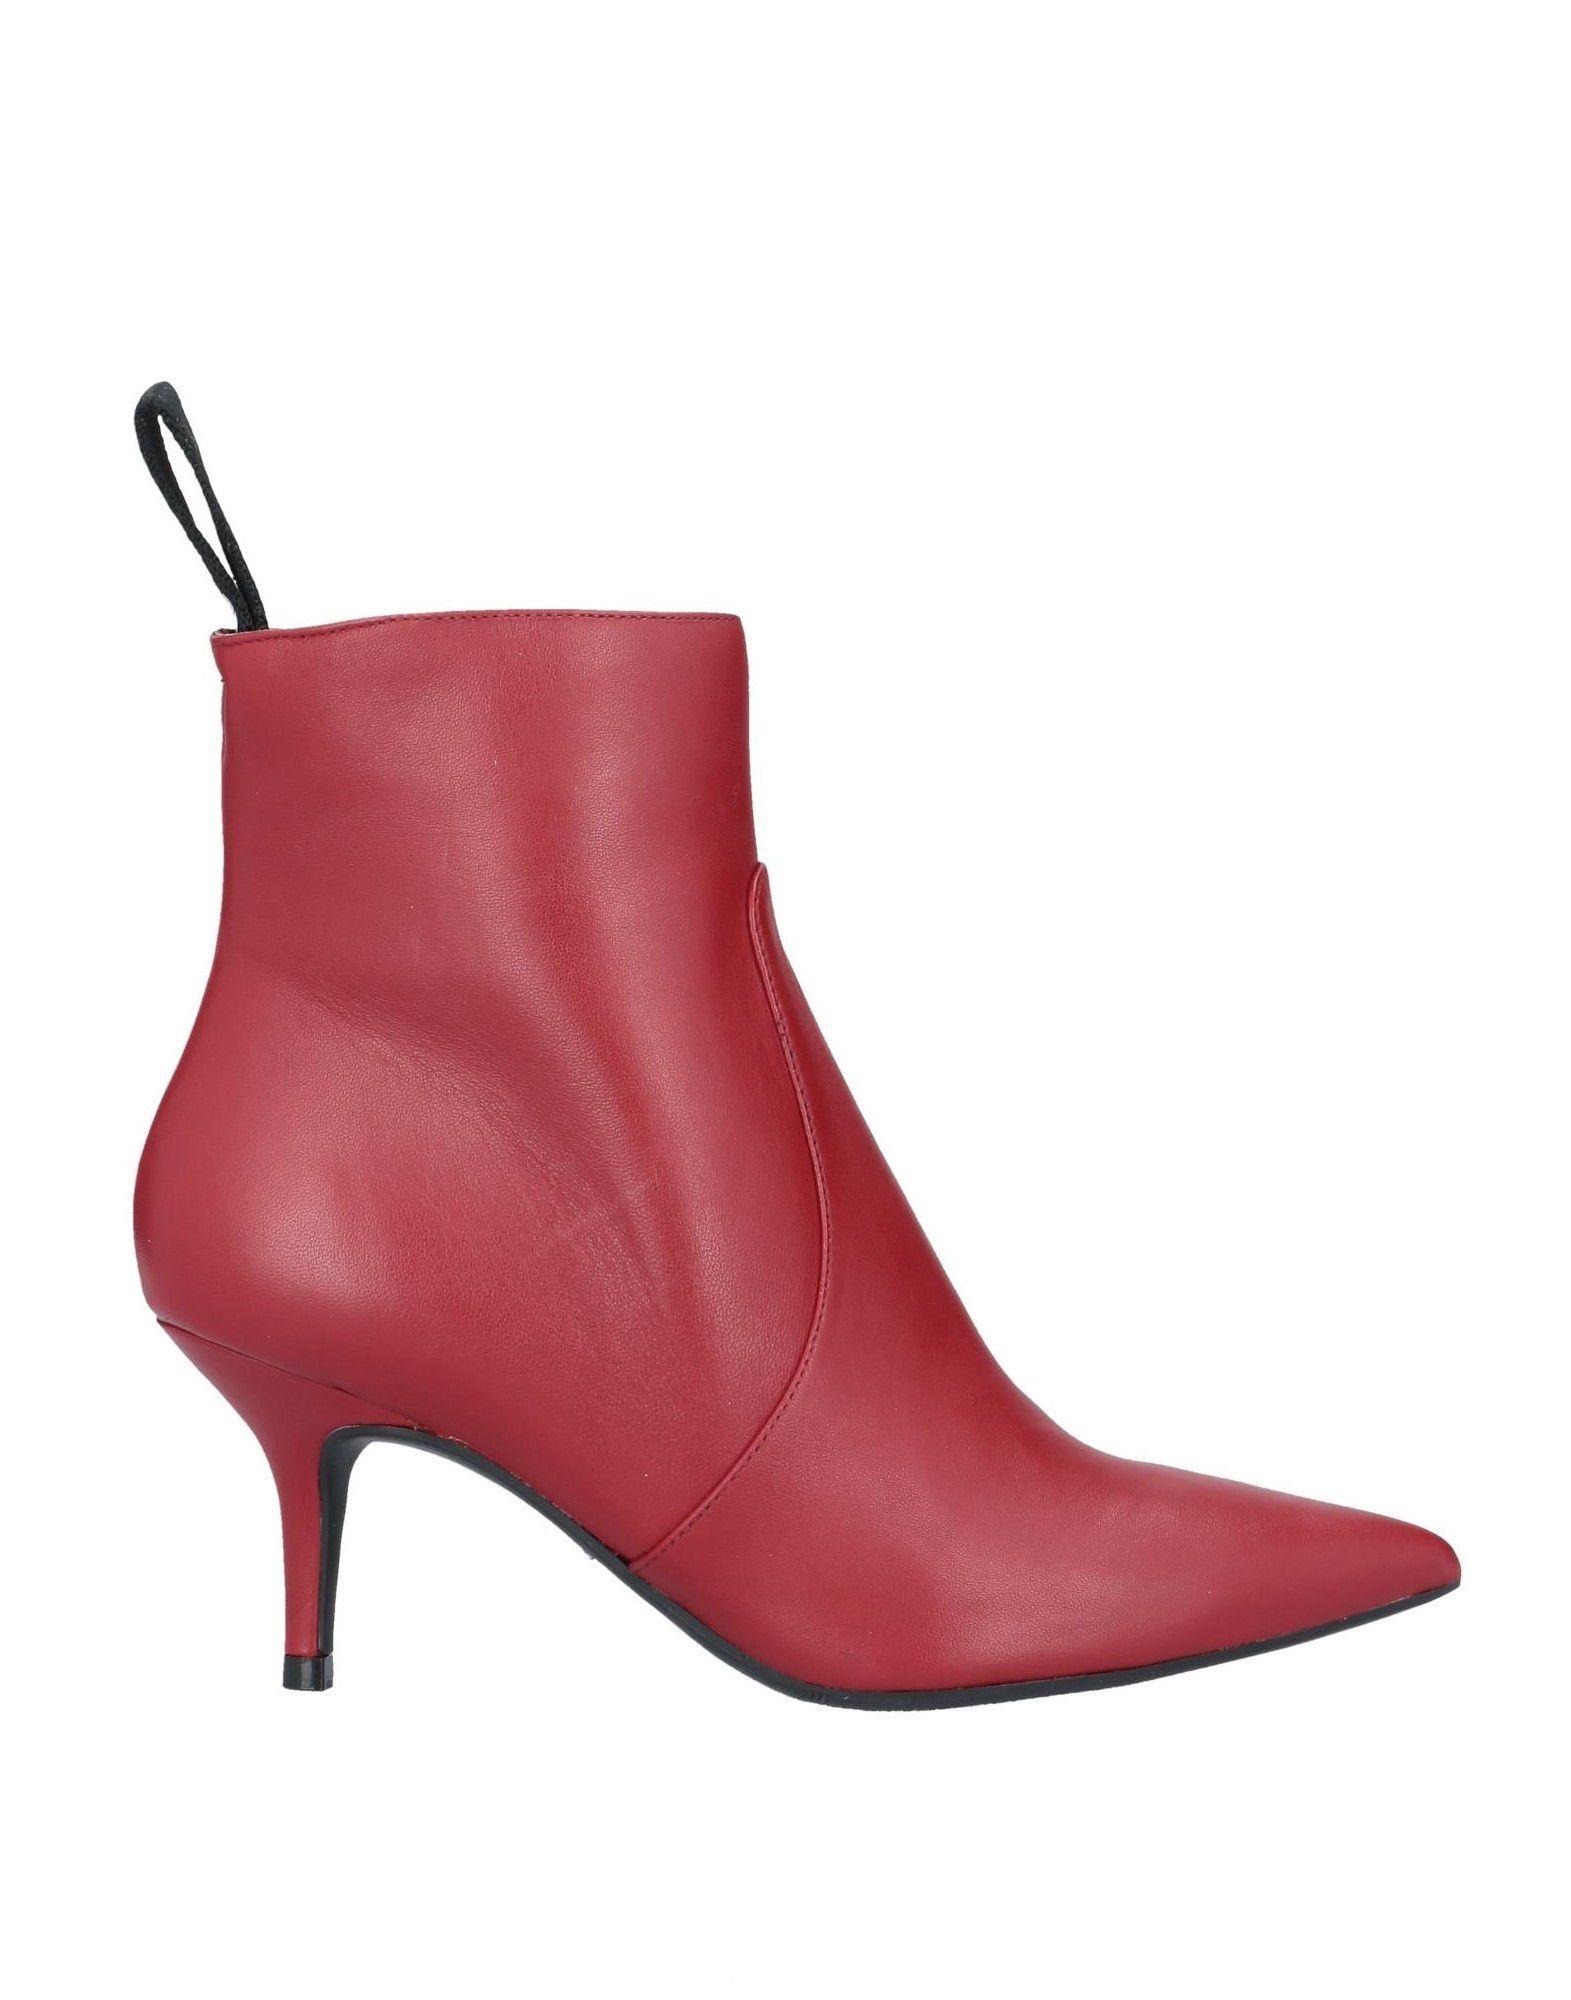 Guess Leather Ankle Boots in Red - Lyst